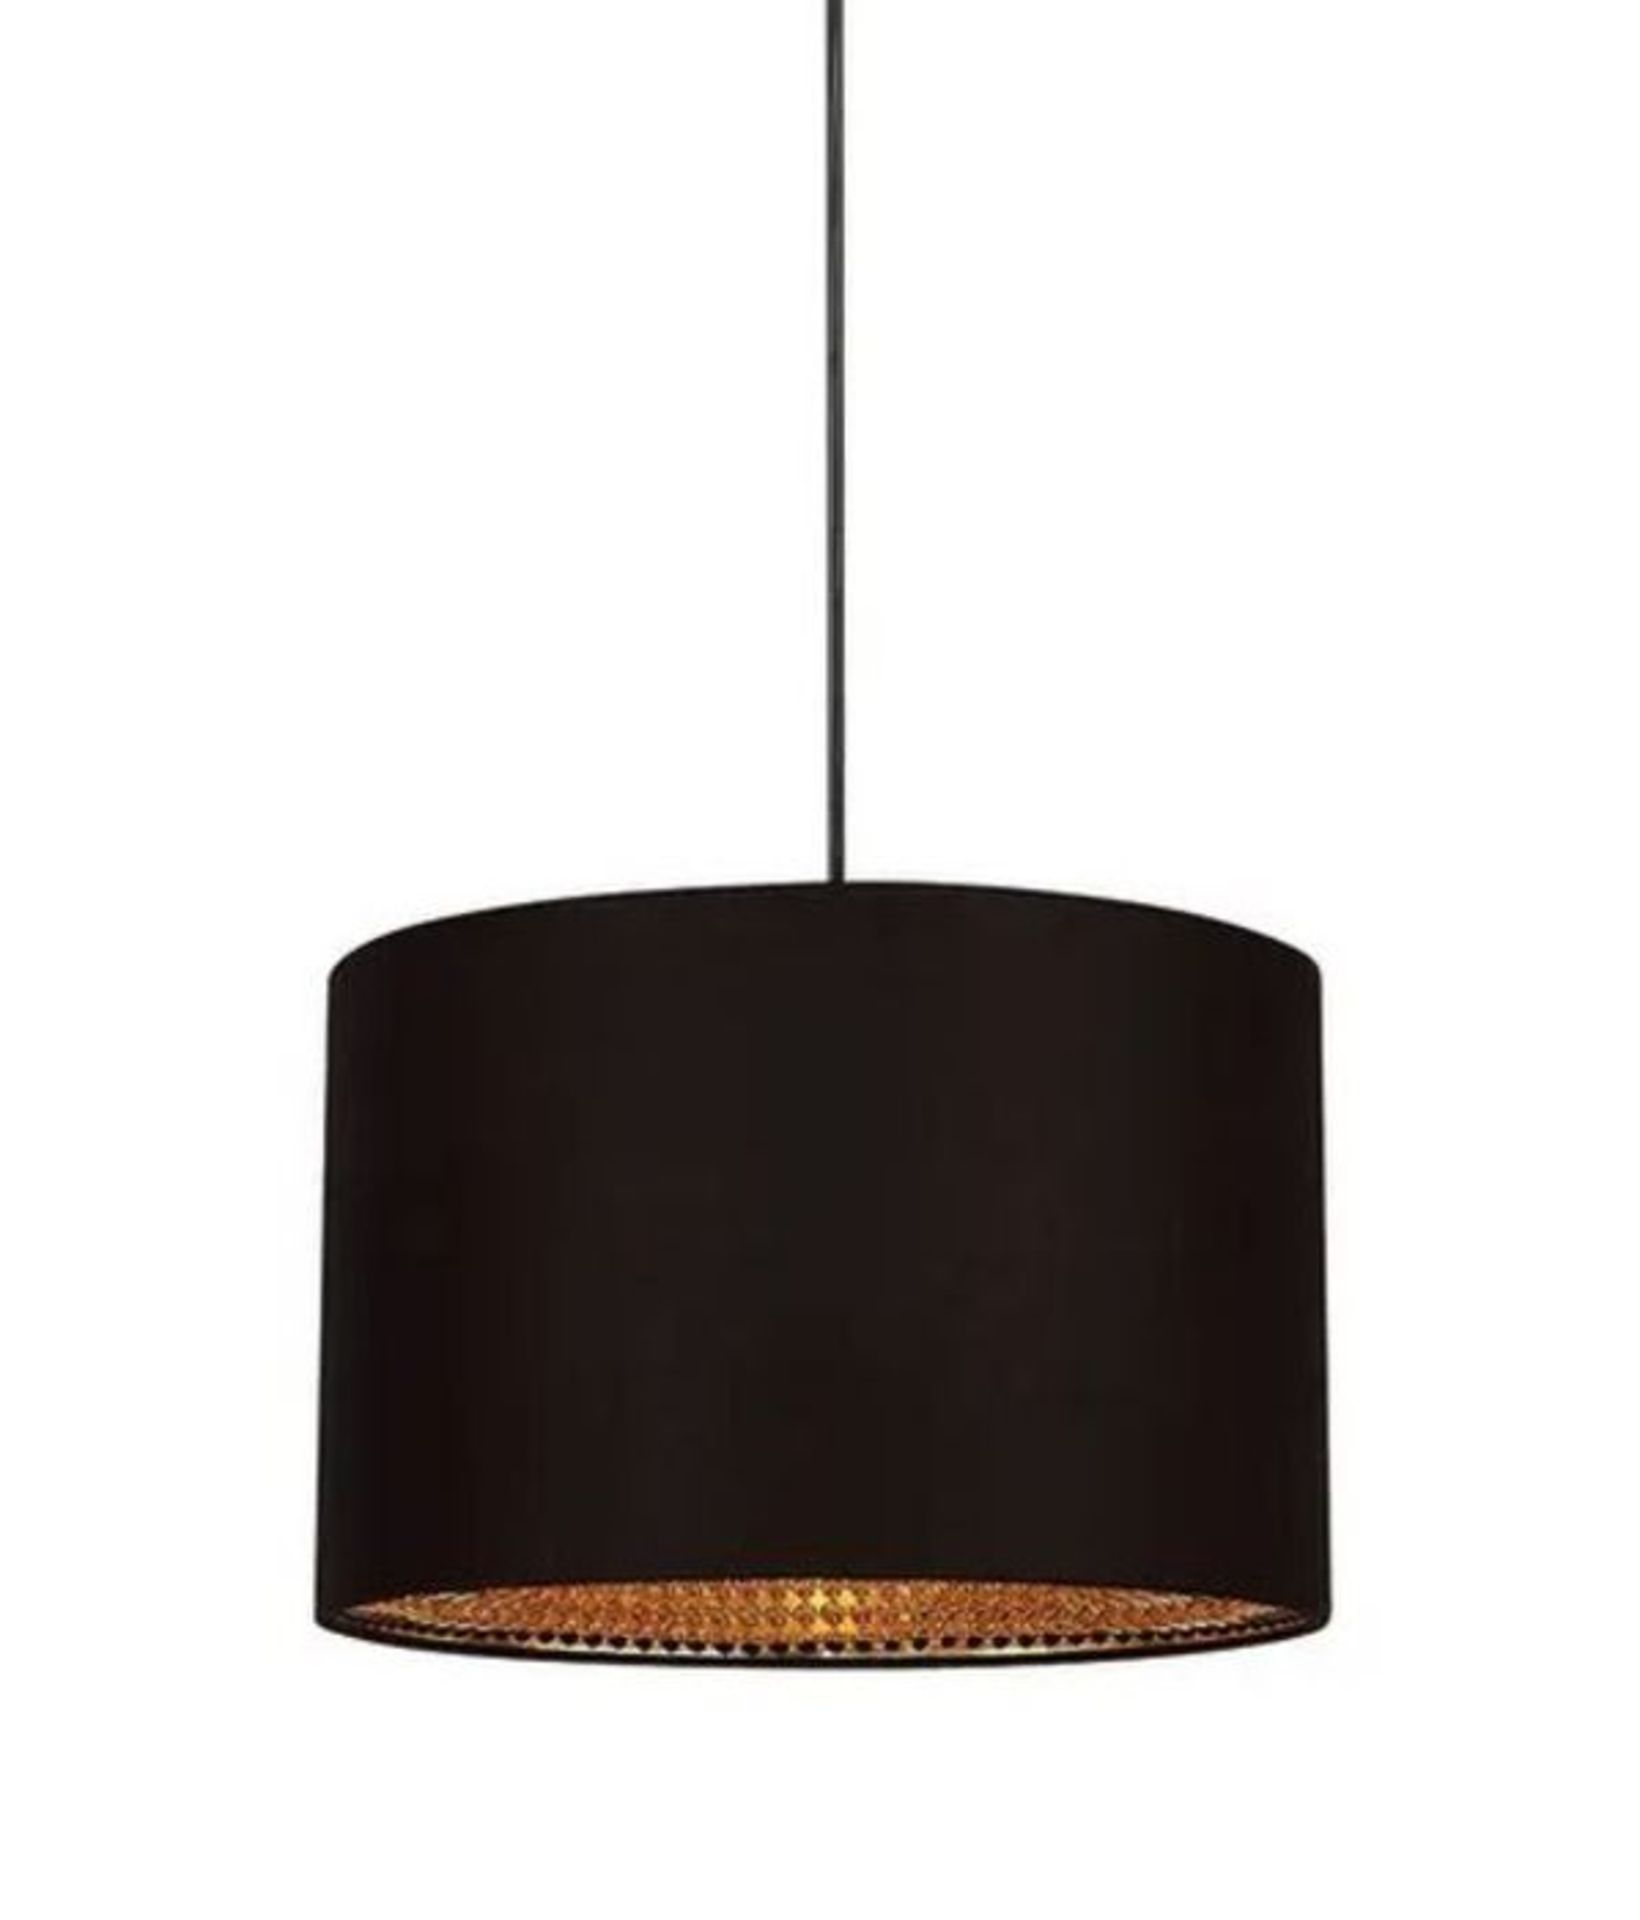 SO'HOME 30cm BLACK FABRIC LAMPSHADE WITH GOLD STUDDED INNER / RRP £39.00 / CUSTOMER RETURN. GRADE A